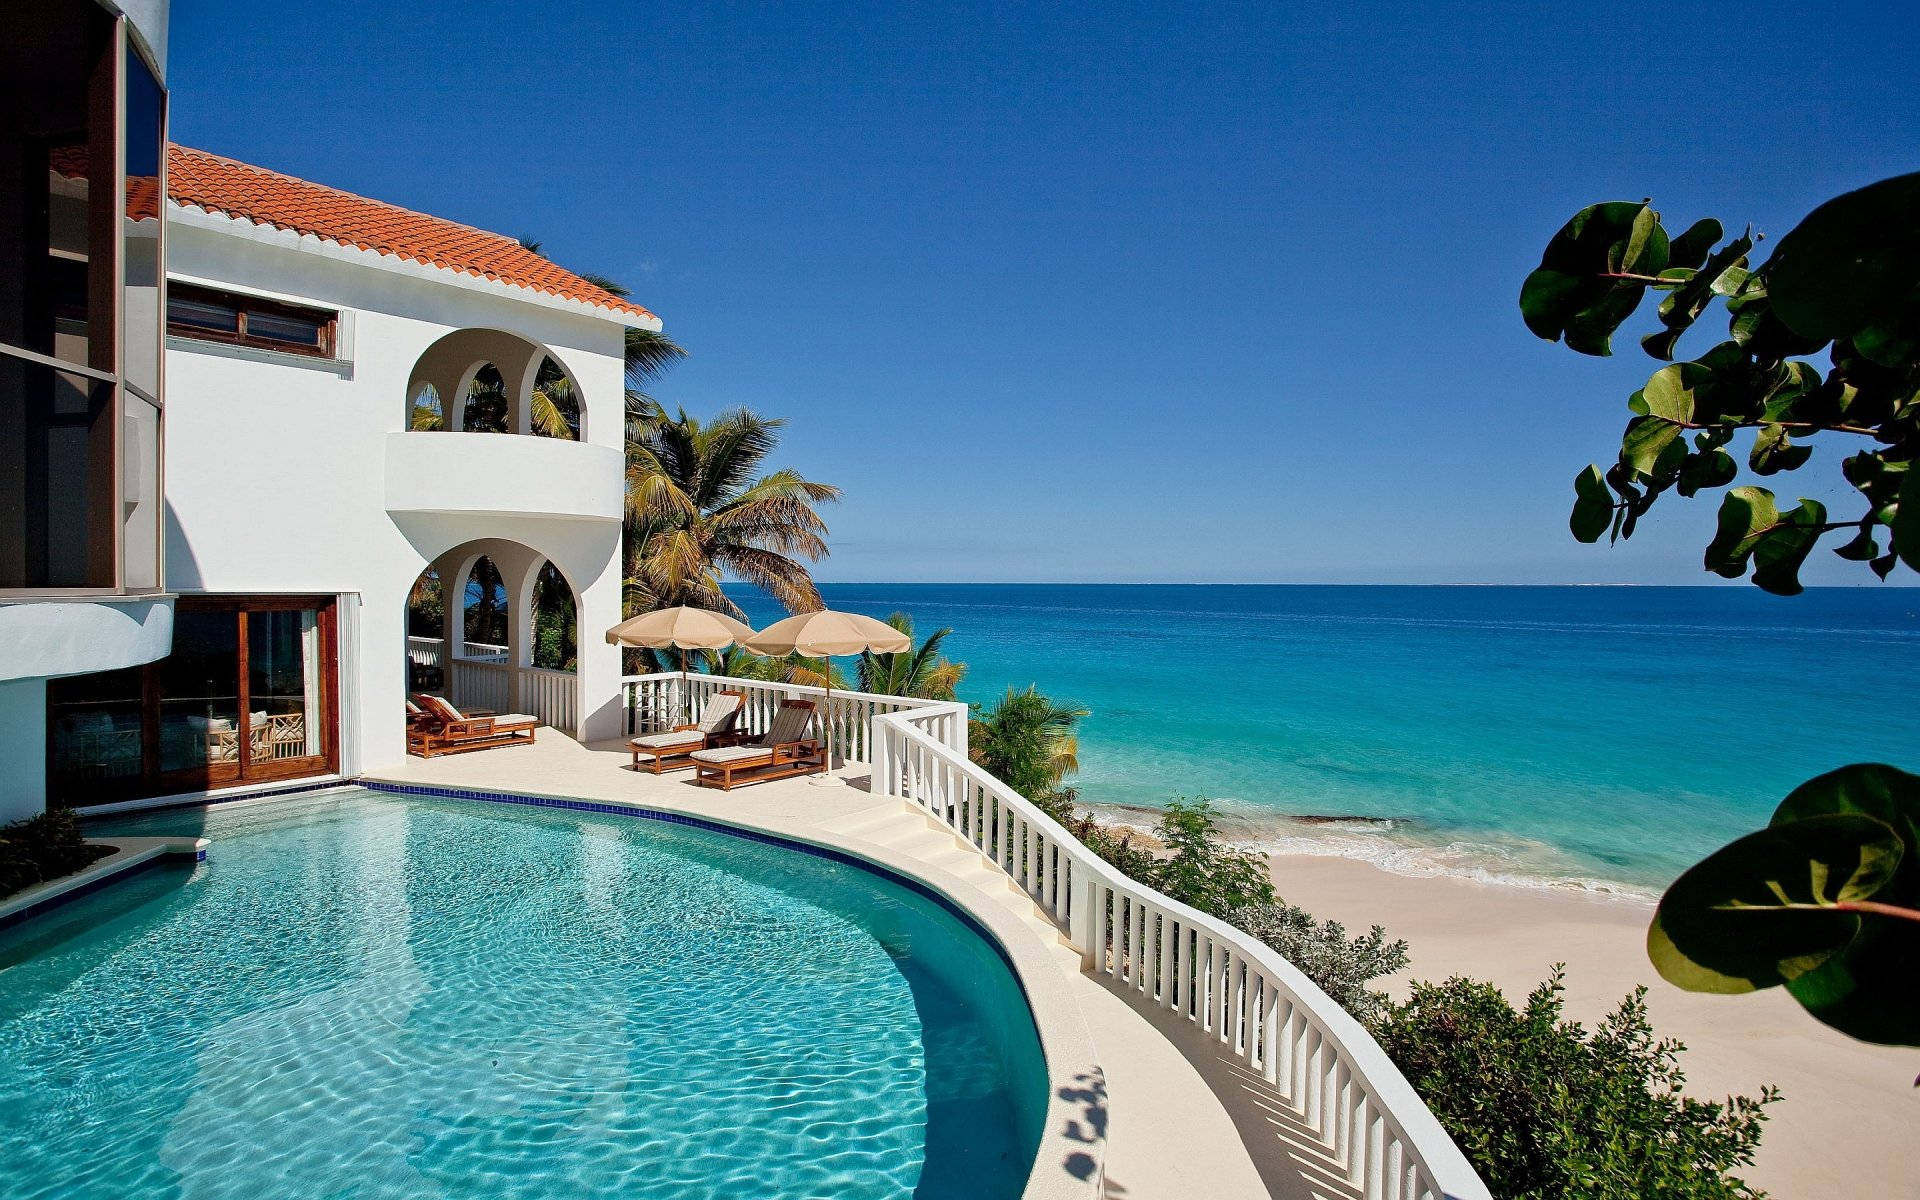 Tranquil Beach House In Anguilla, Caribbean Background